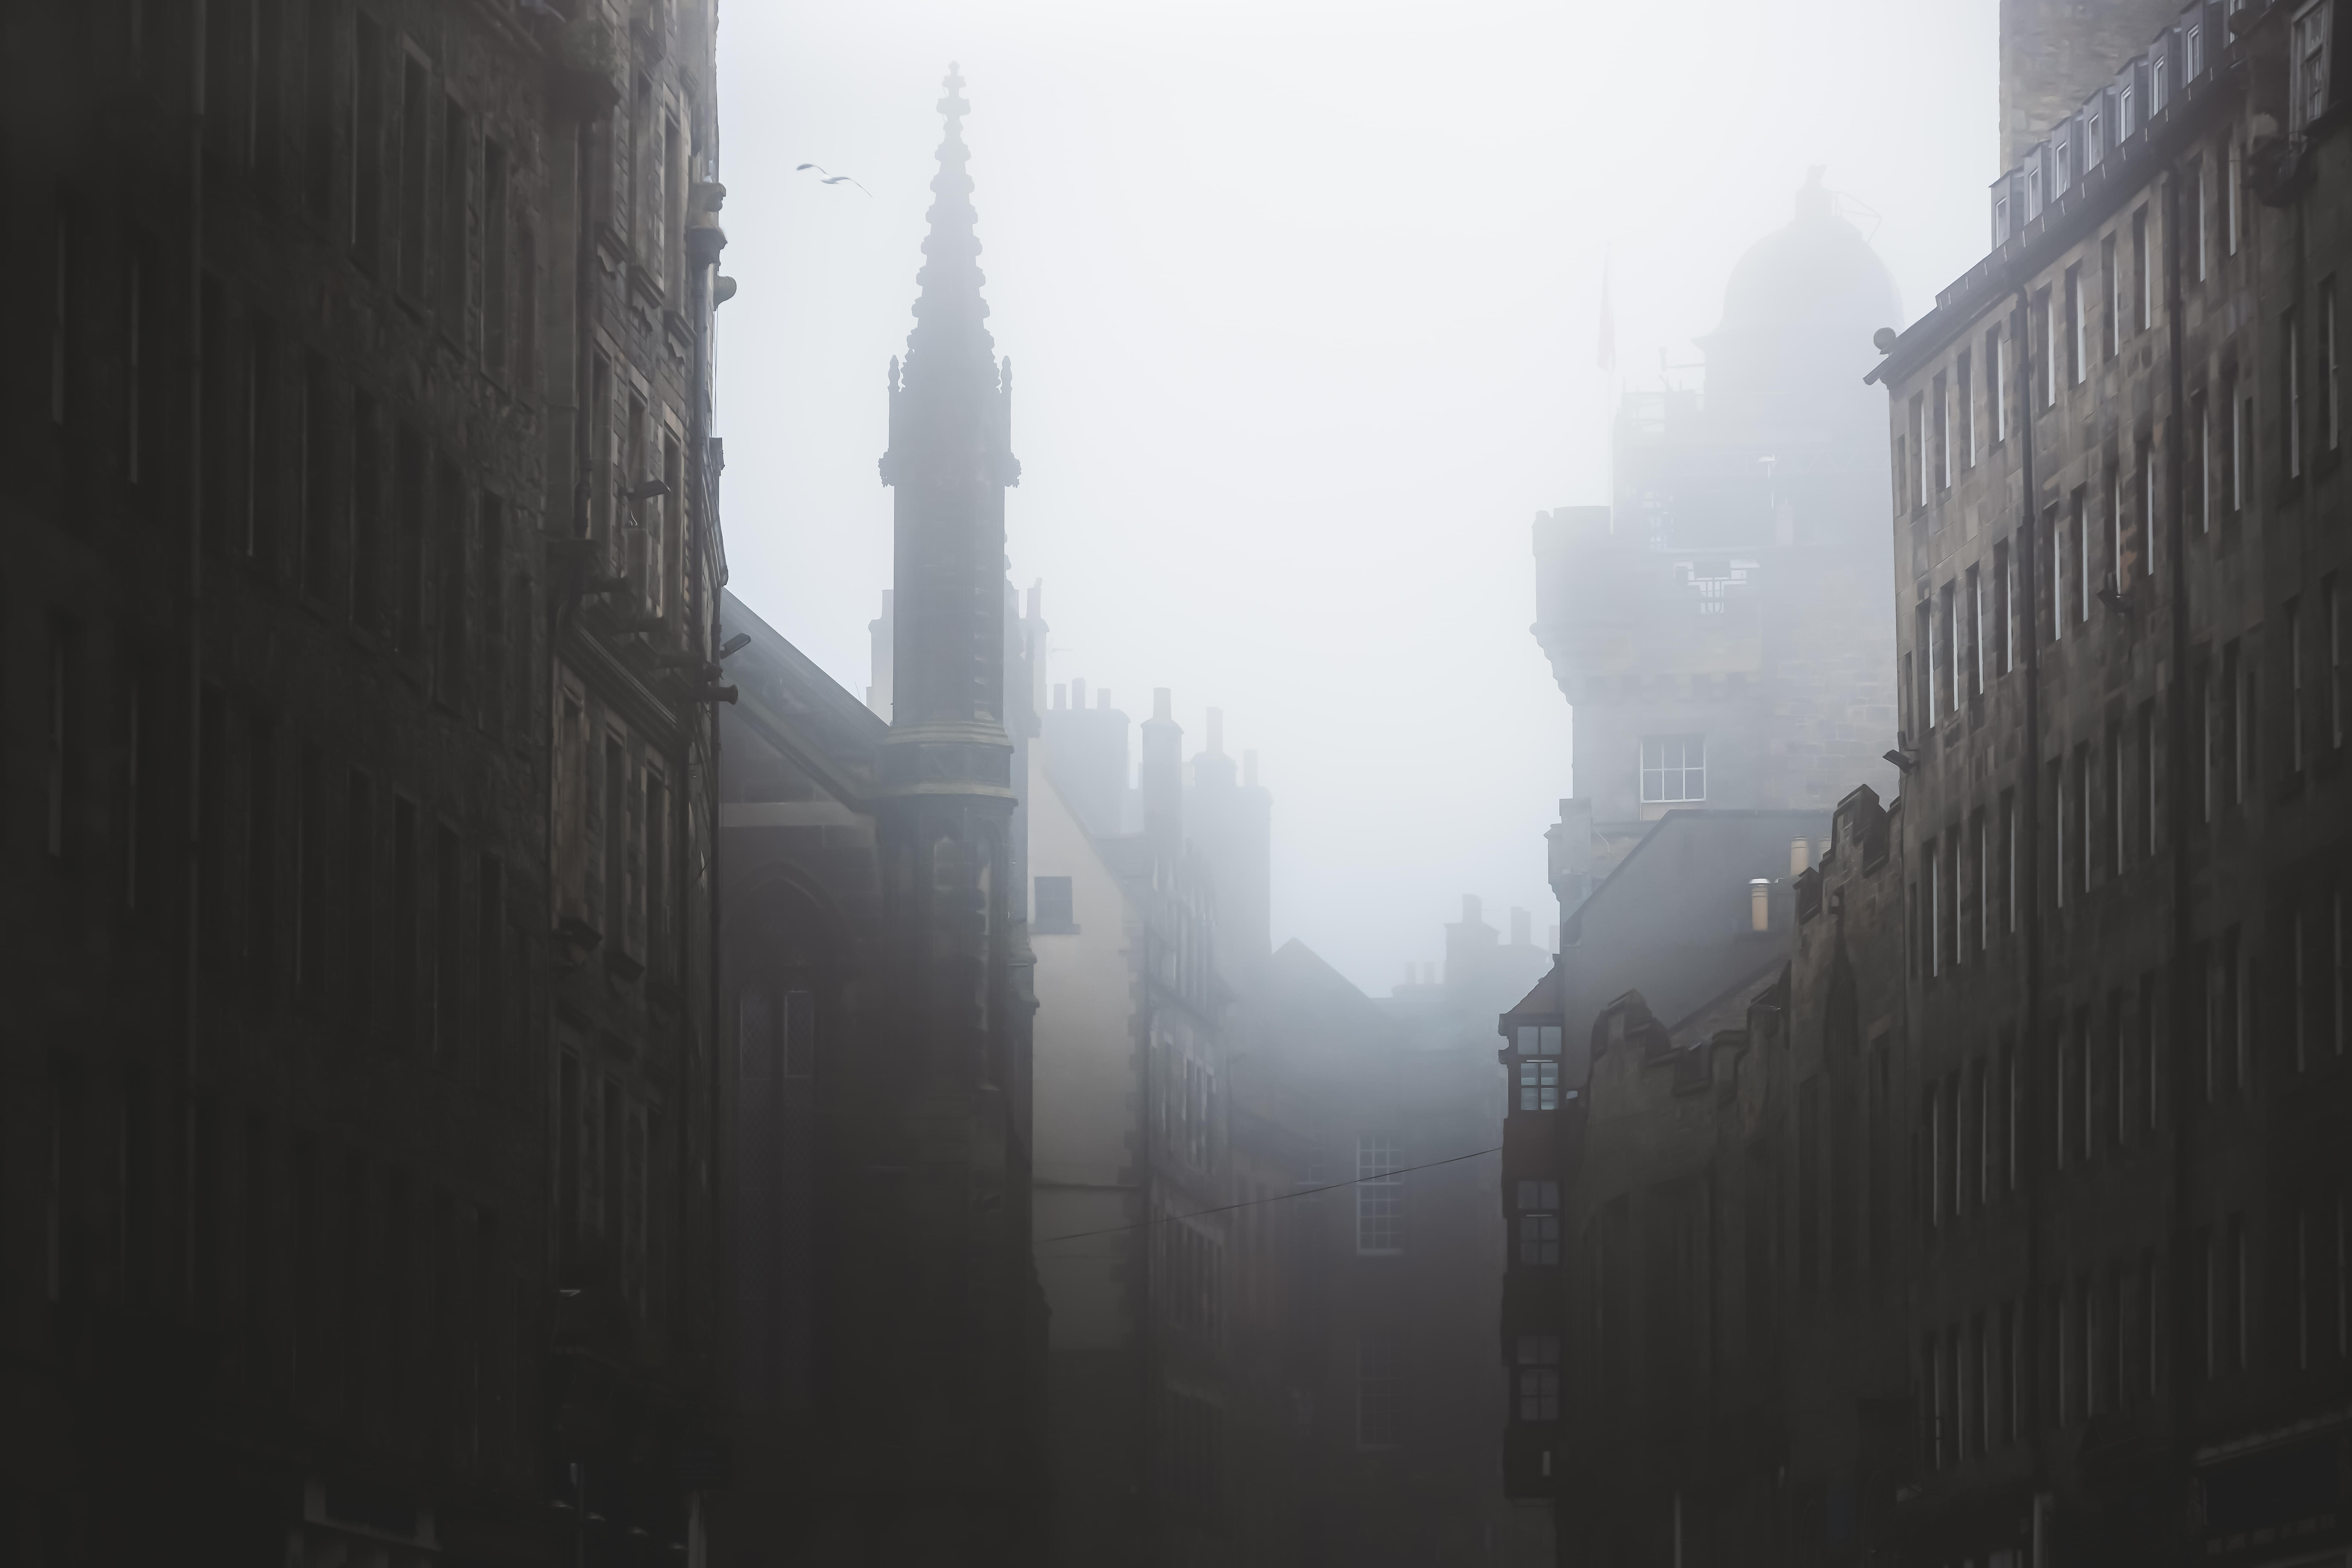 Experience the chills while taking on this paranormal tour in Edinburgh